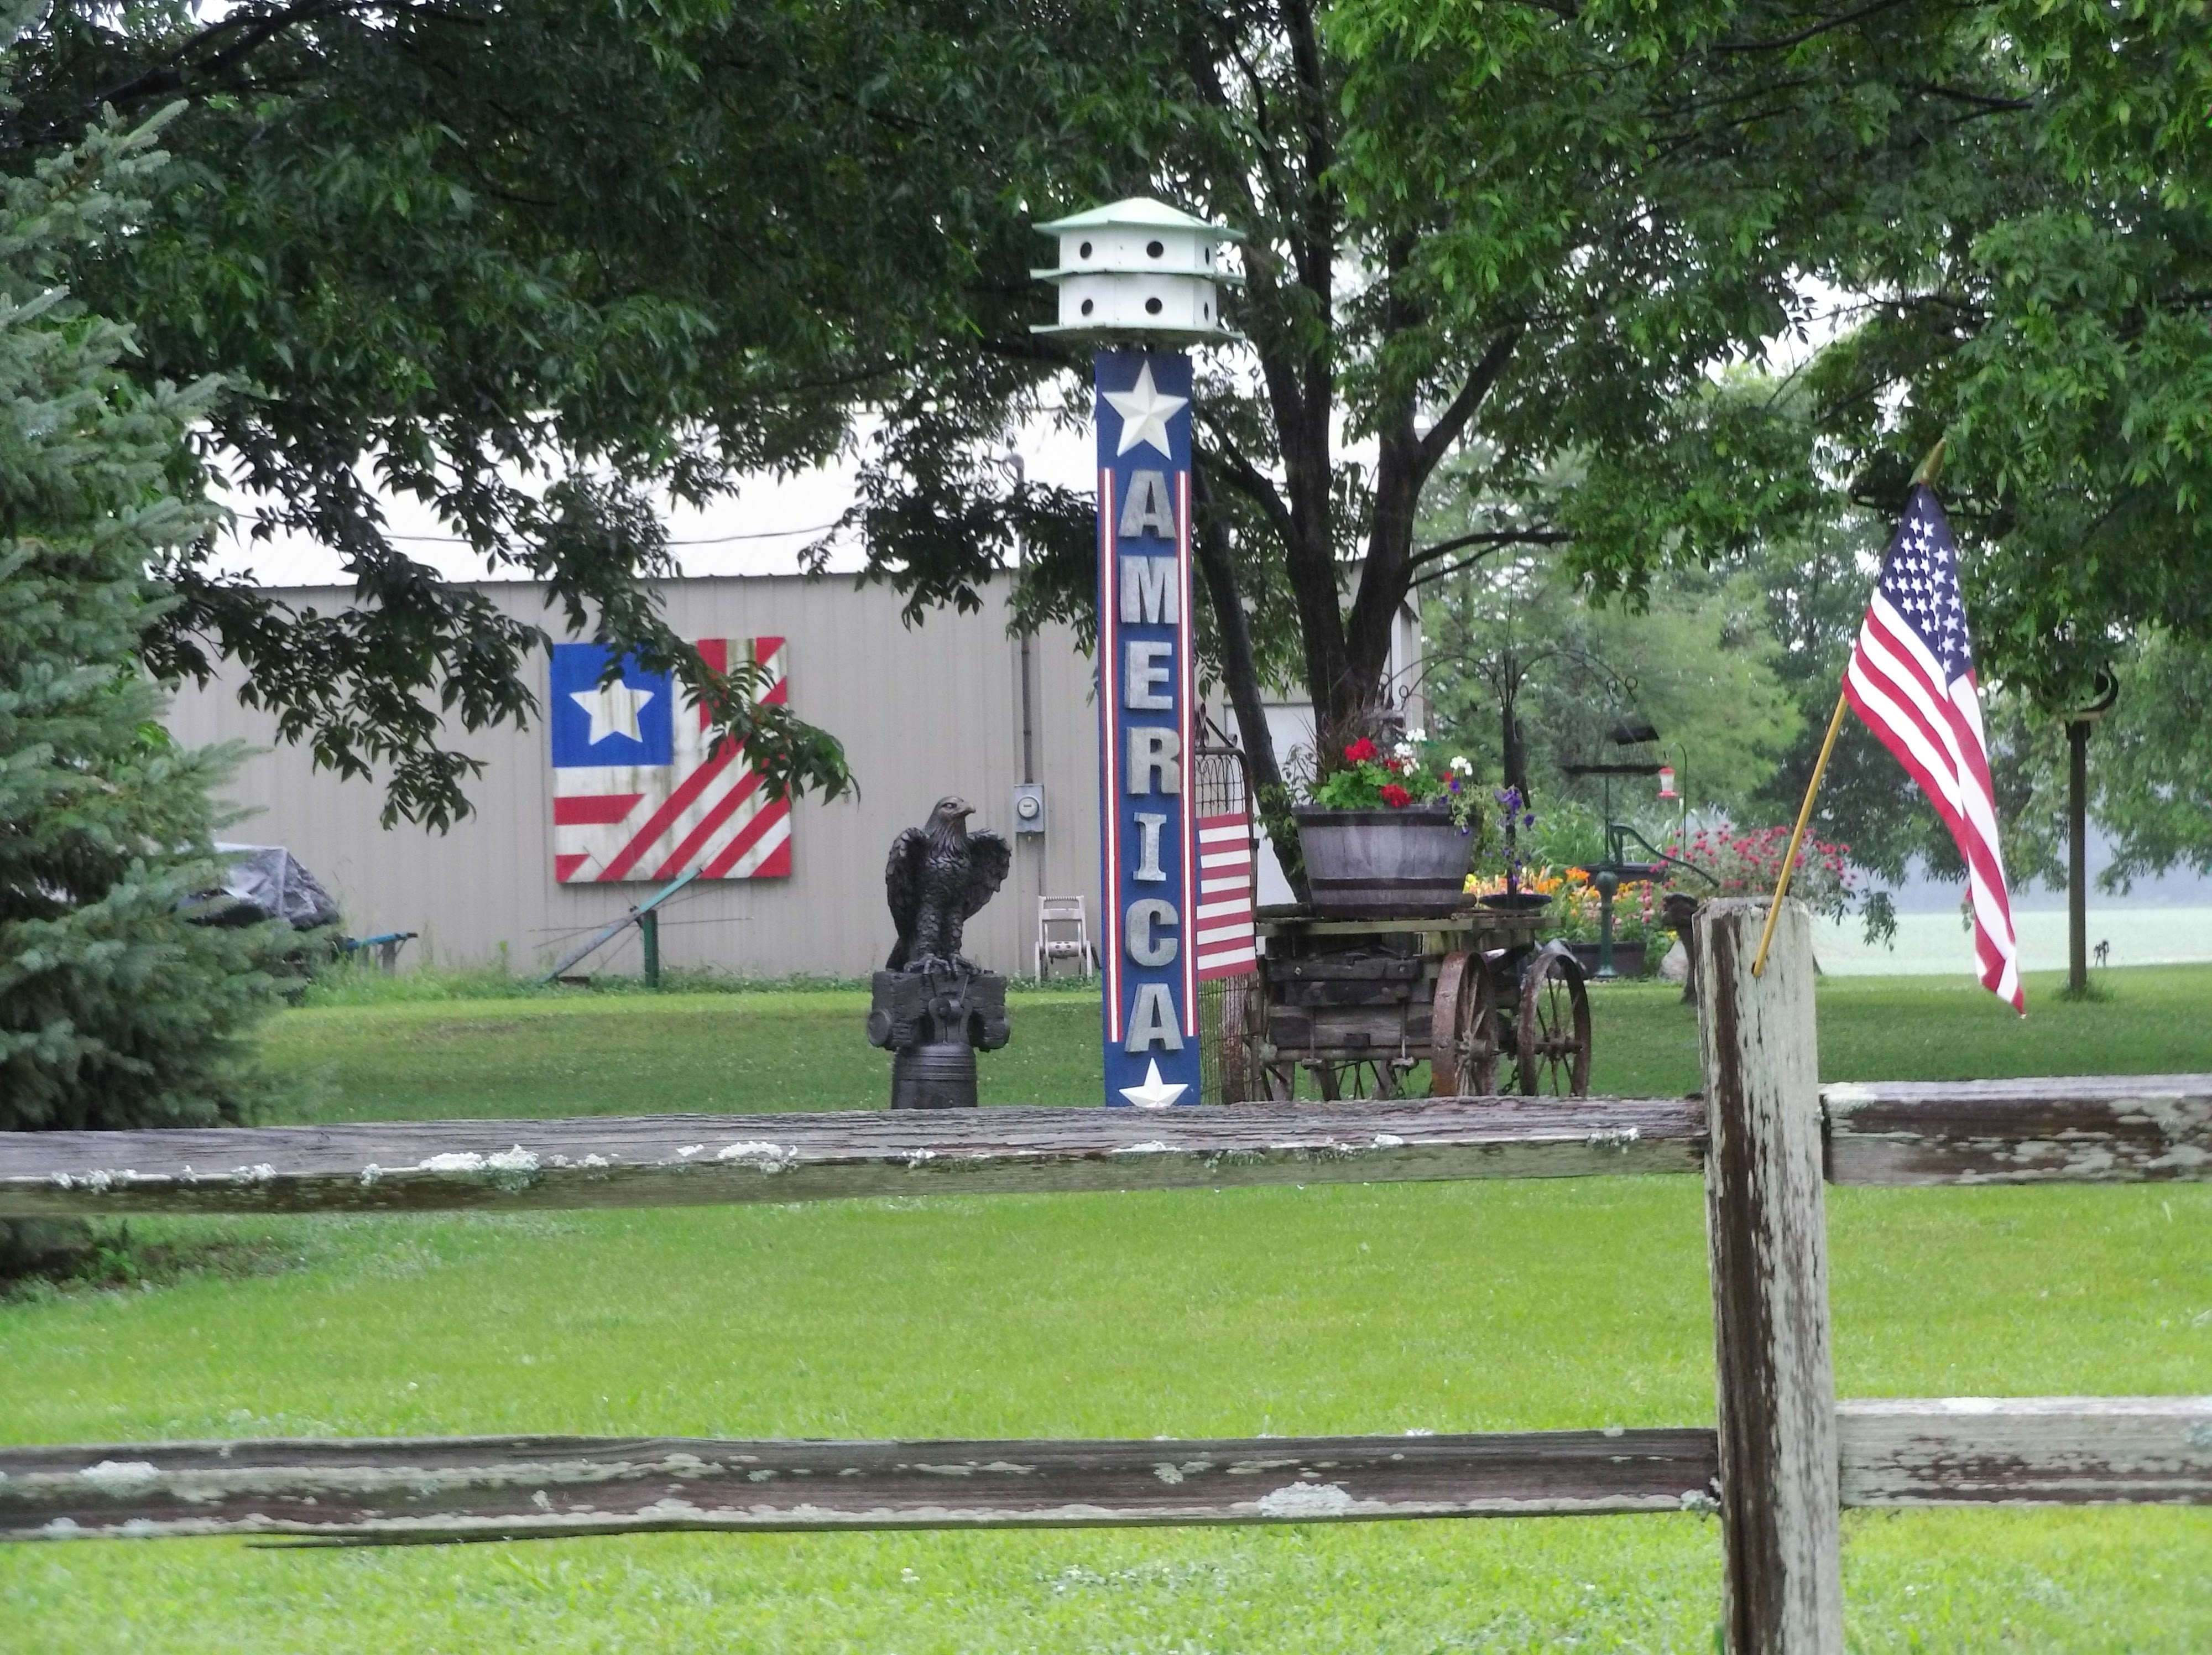 a fence, a statue of a bald eagle, many flags, and a big banner that says AMERICA, in a front yard